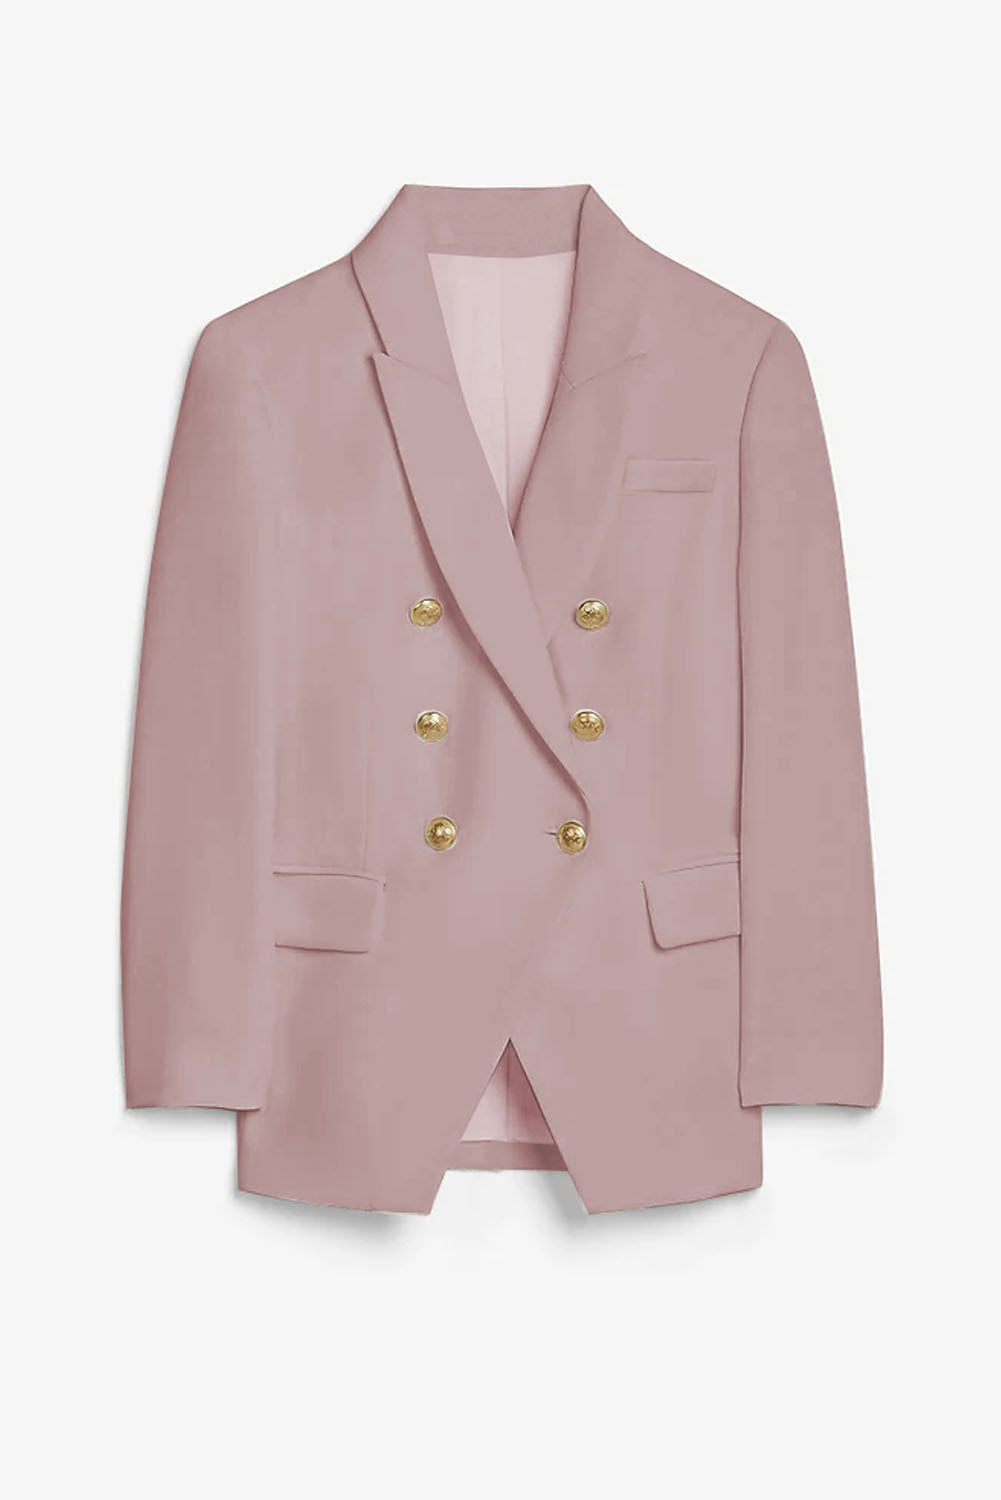 LC852446-10-S, LC852446-10-M, LC852446-10-L, LC852446-10-XL, LC852446-10-2XL, Pink Womens Lapel Button Work Jackets Draped Open Front Work Suit